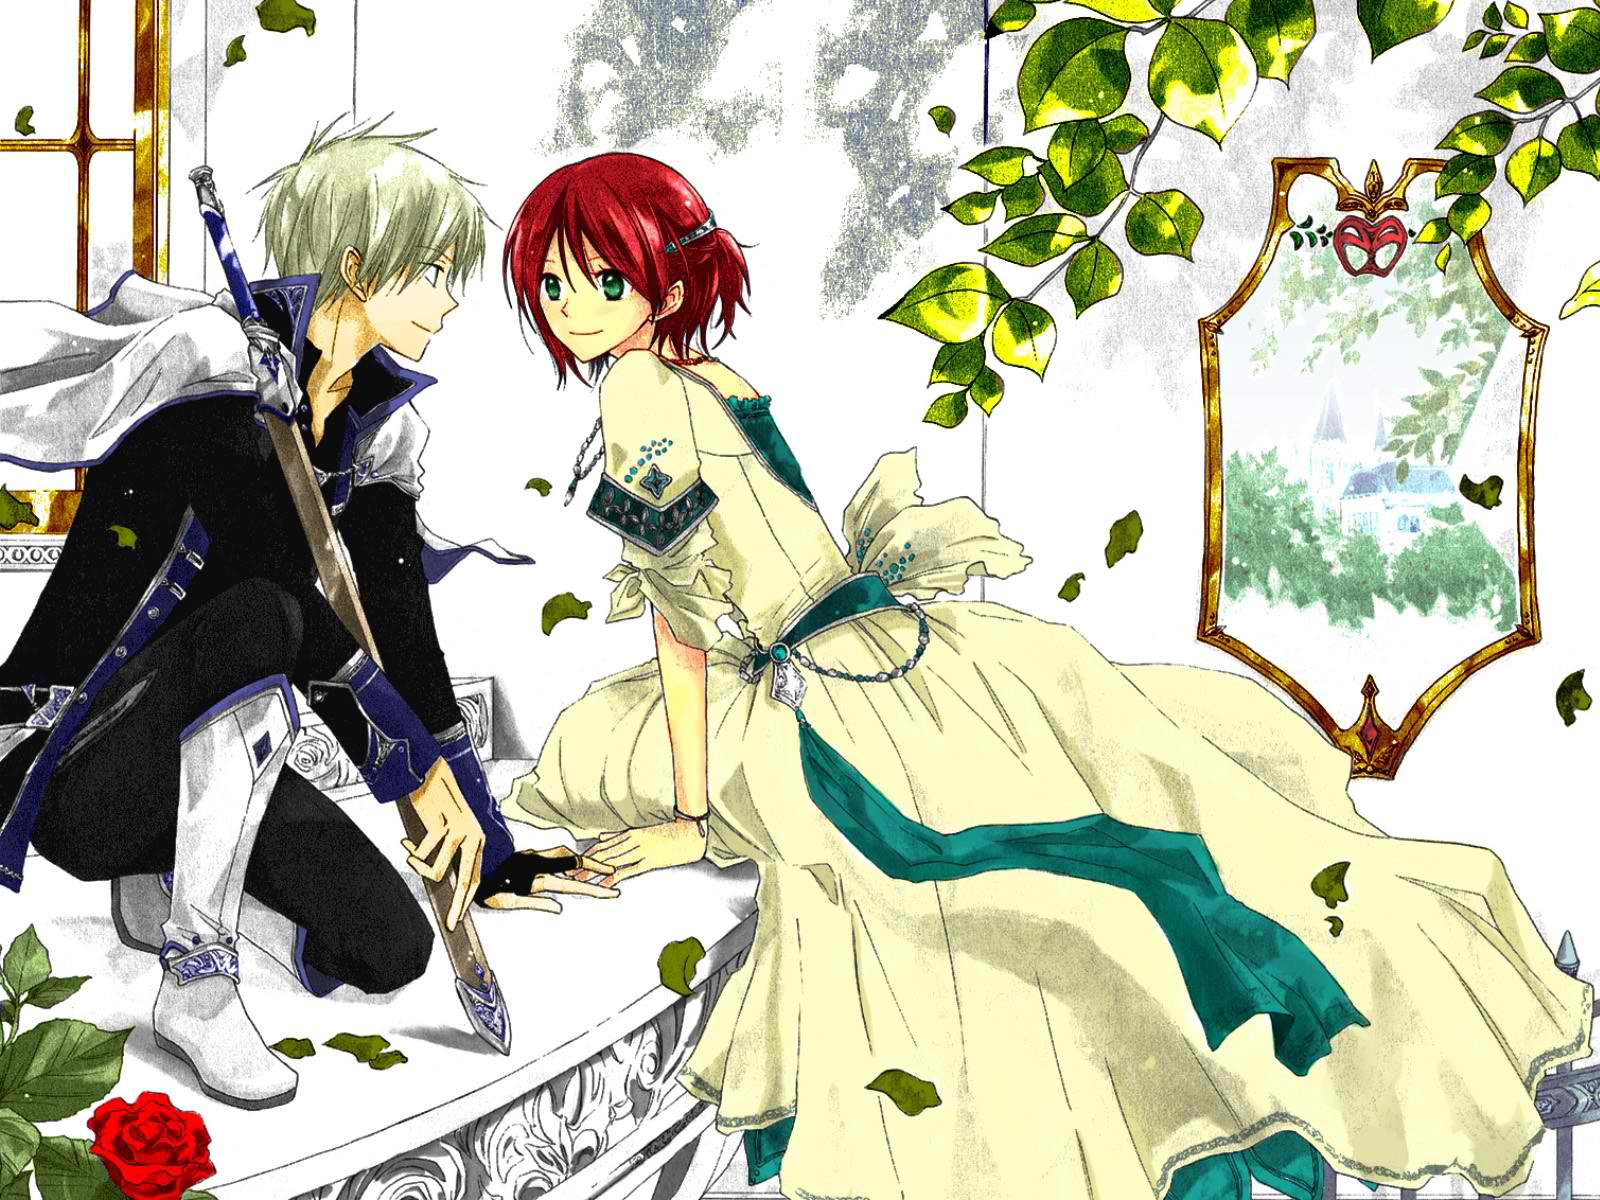 Manga or anime â snow white with the red hair â bloom reviews